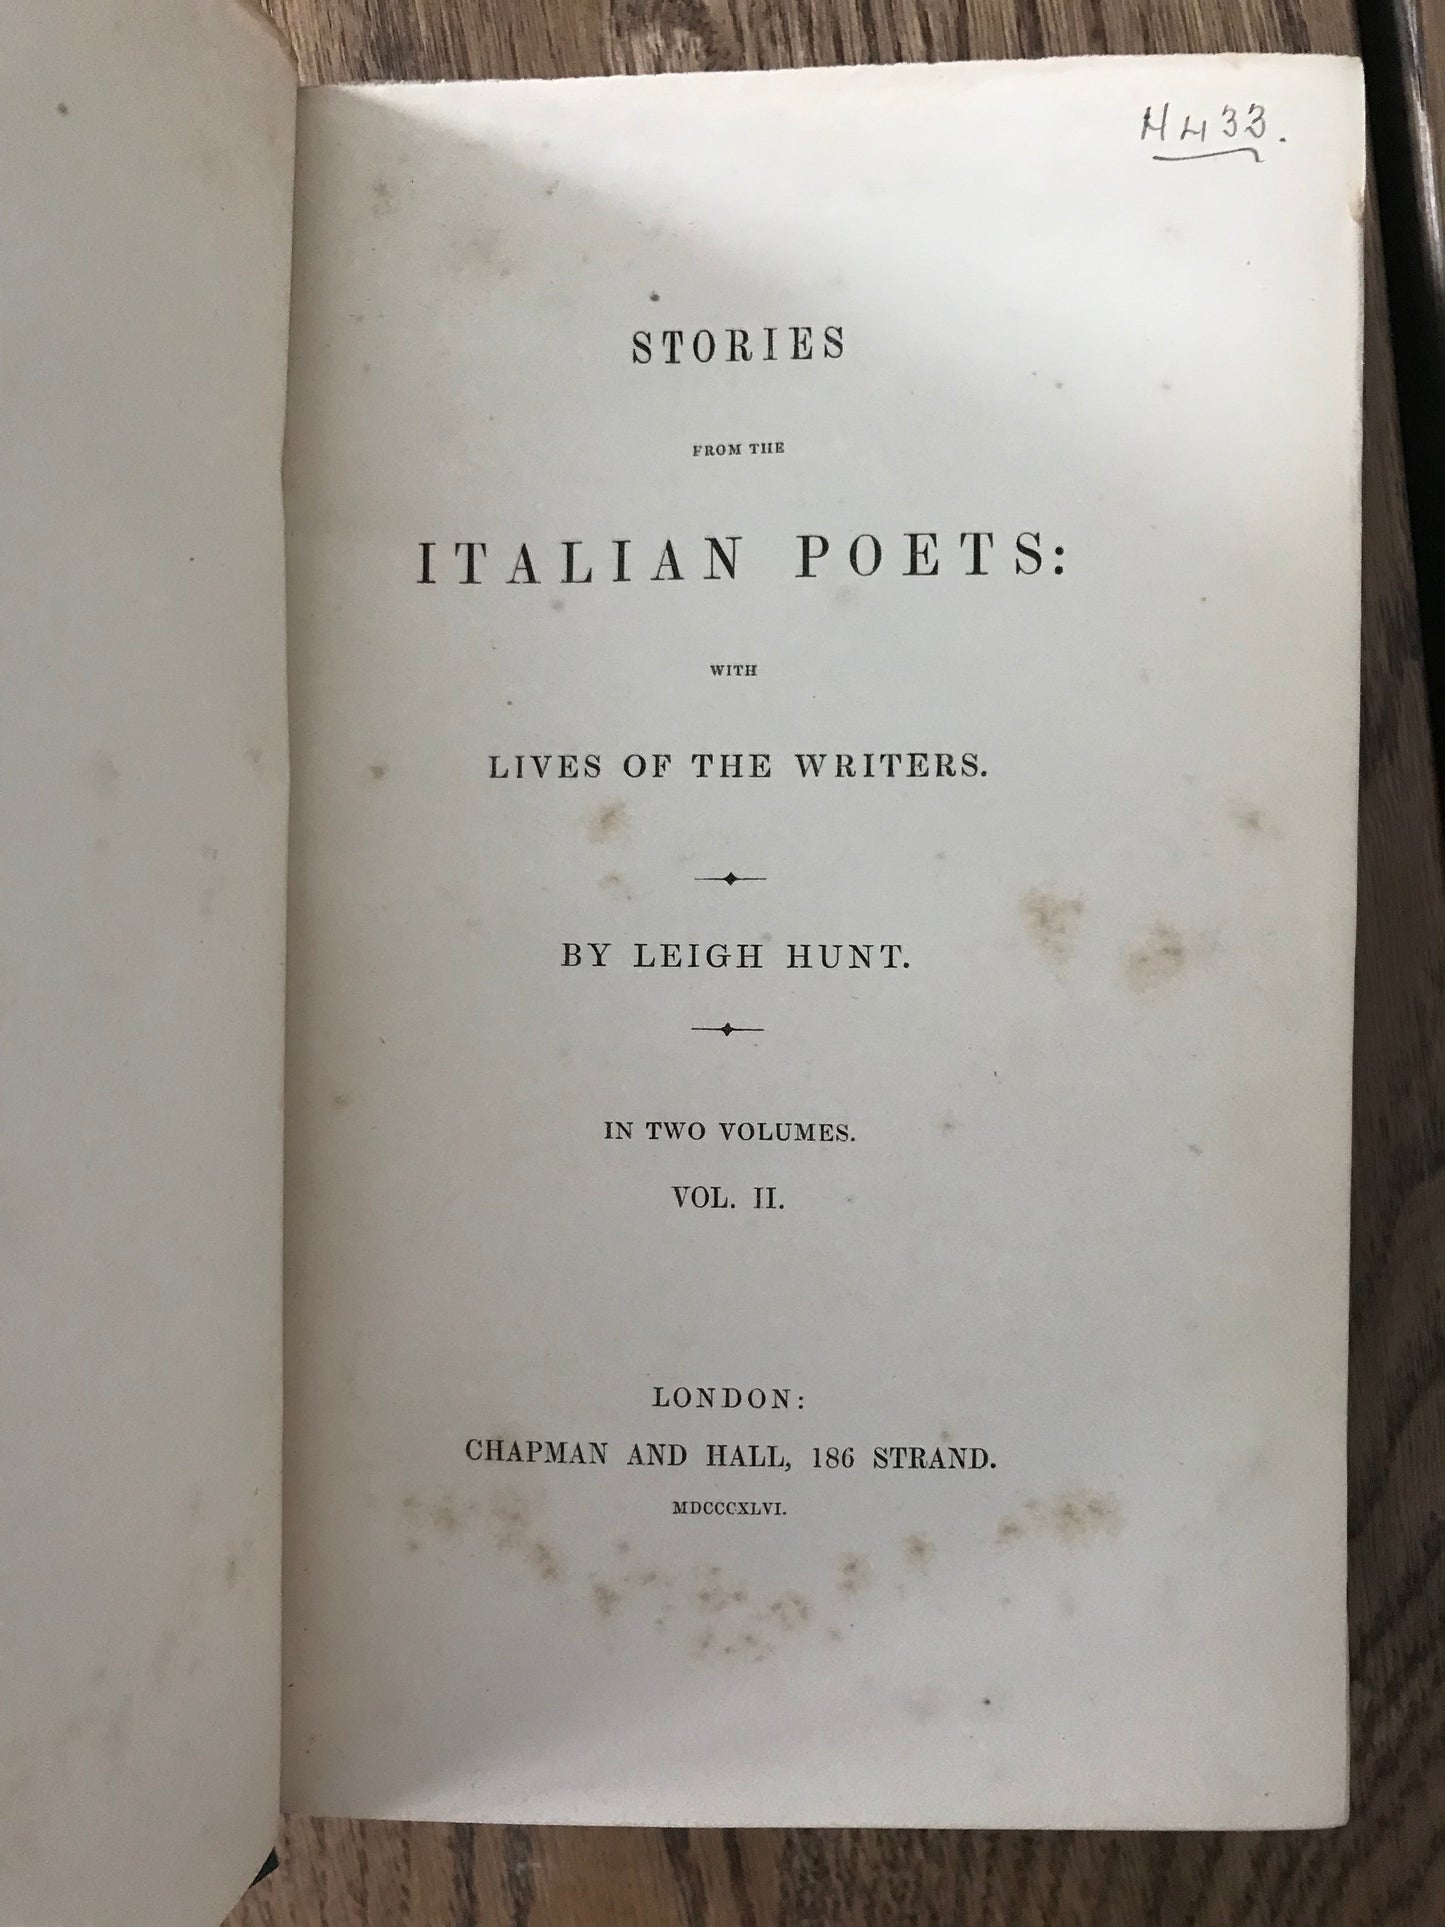 STORIES FROM THE ITALIAN POETS - LEIGH HUNT BooksCardsNBikes